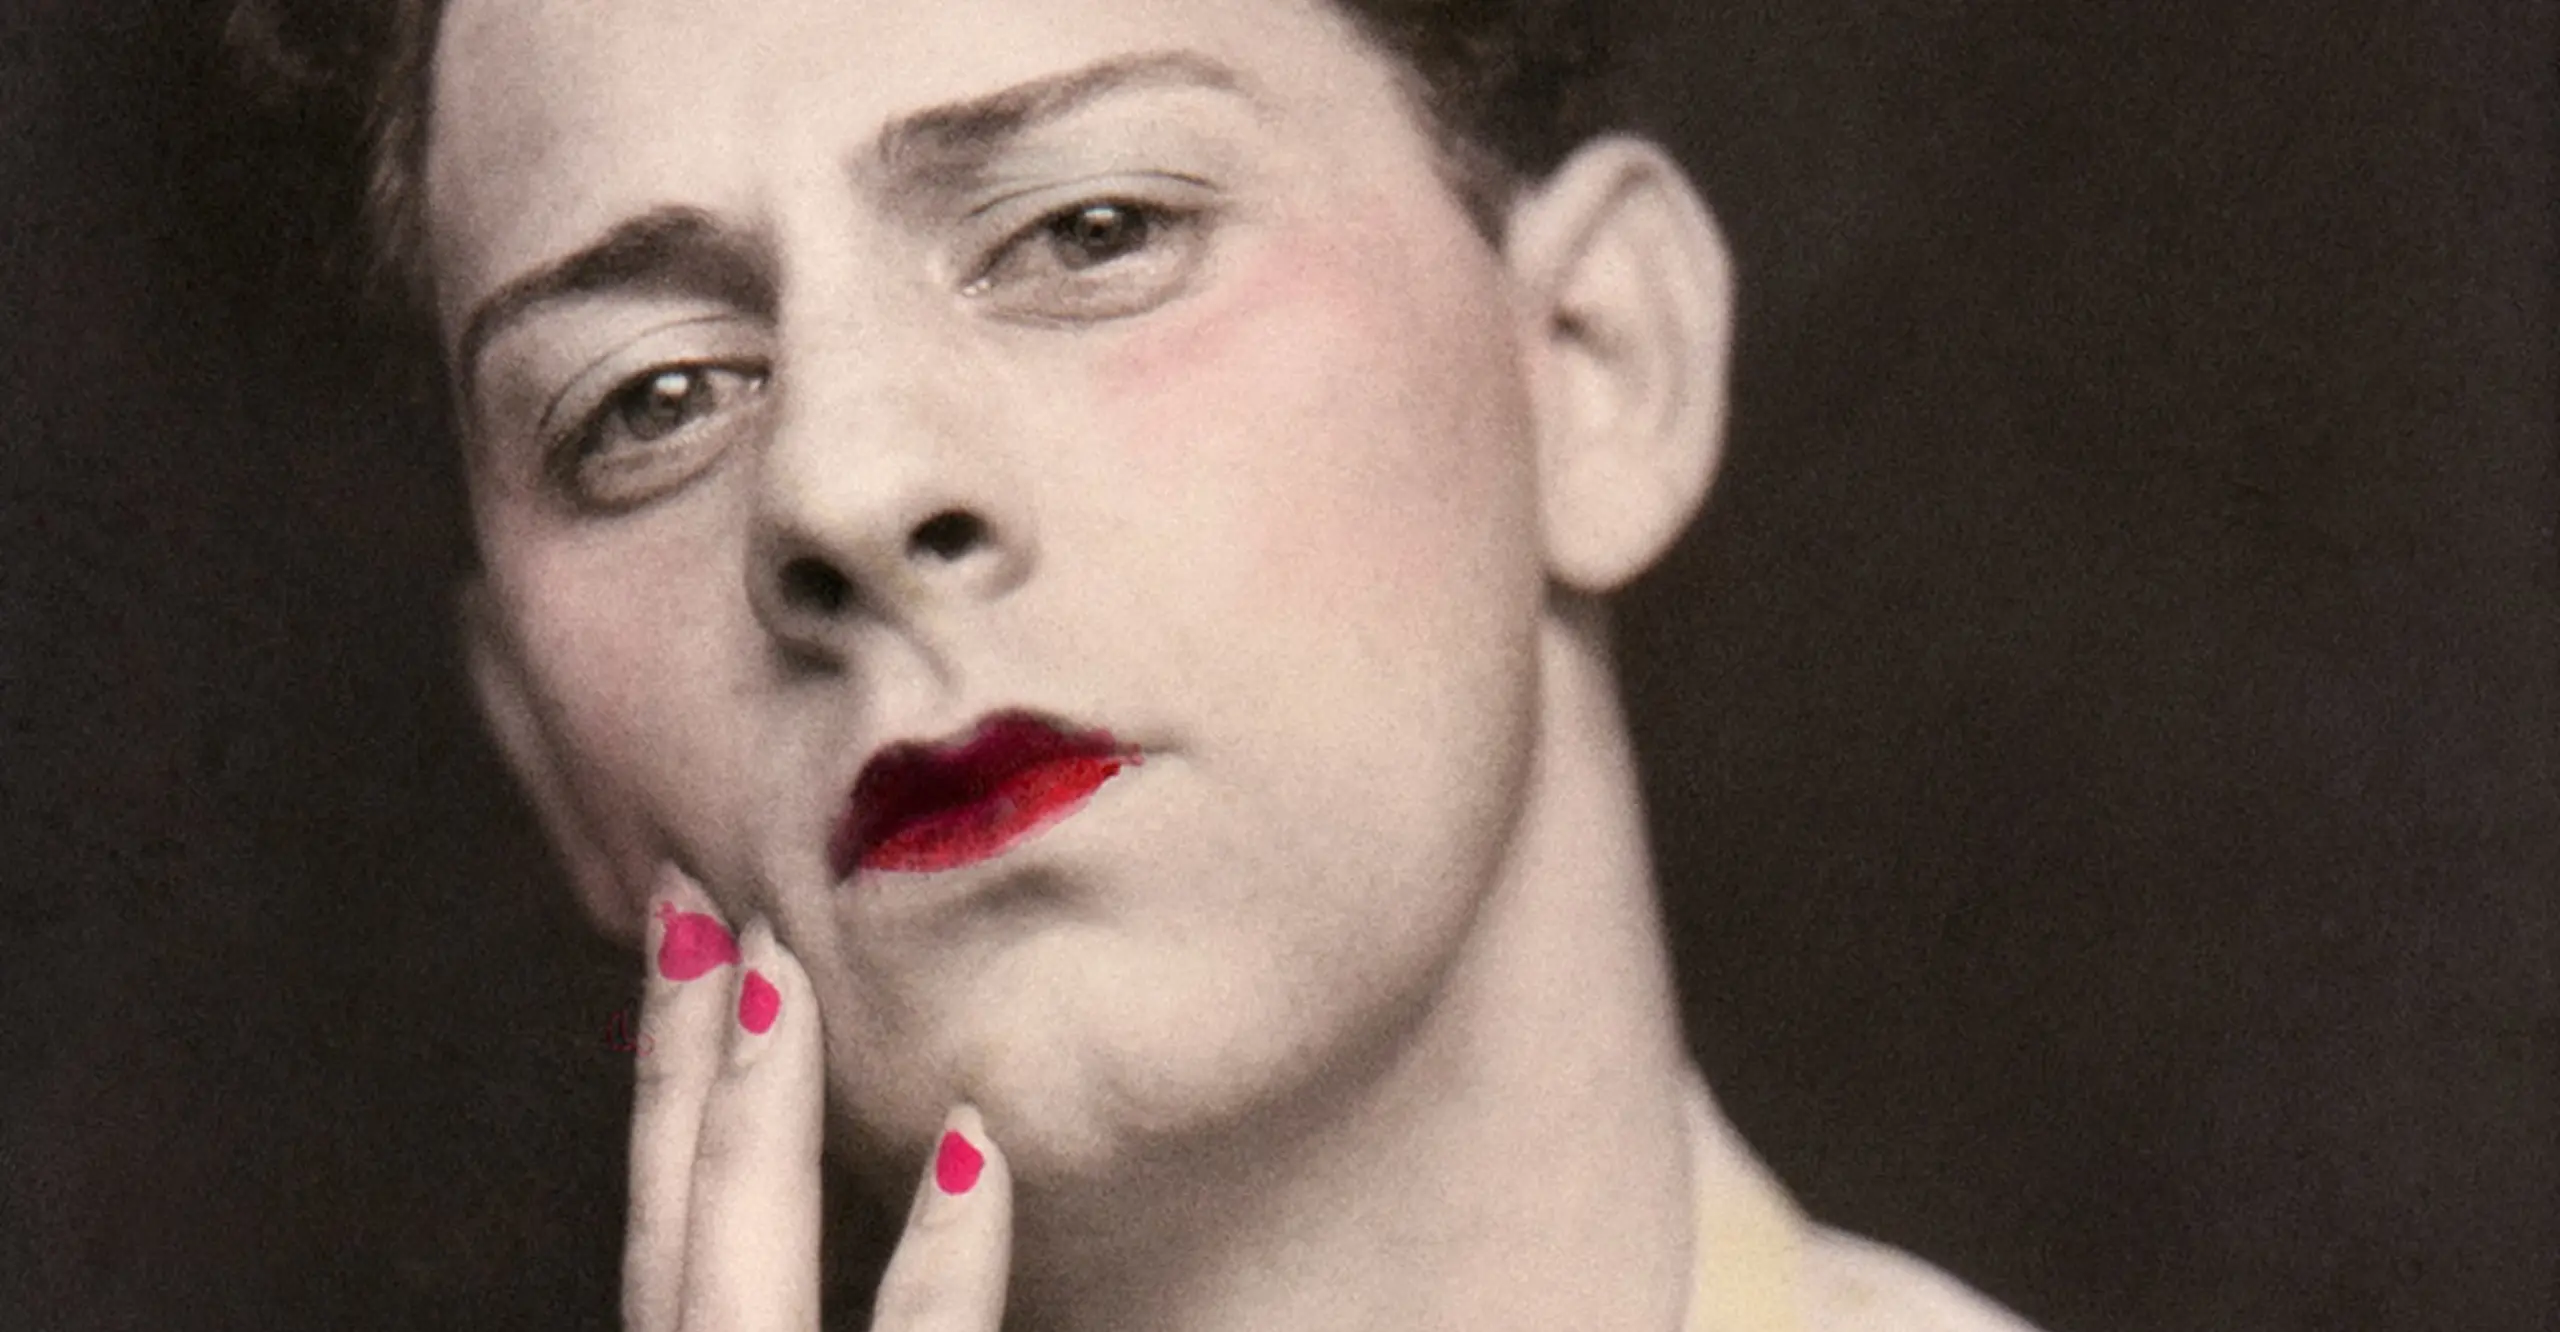 Man in makeup wearing ring. Photograph from a photo booth, with highlights of color. United States, circa 1920.  © Sebastian Lifshitz Collection  Courtesy of Sebastian Lifshitz and The Photographers’ Gallery